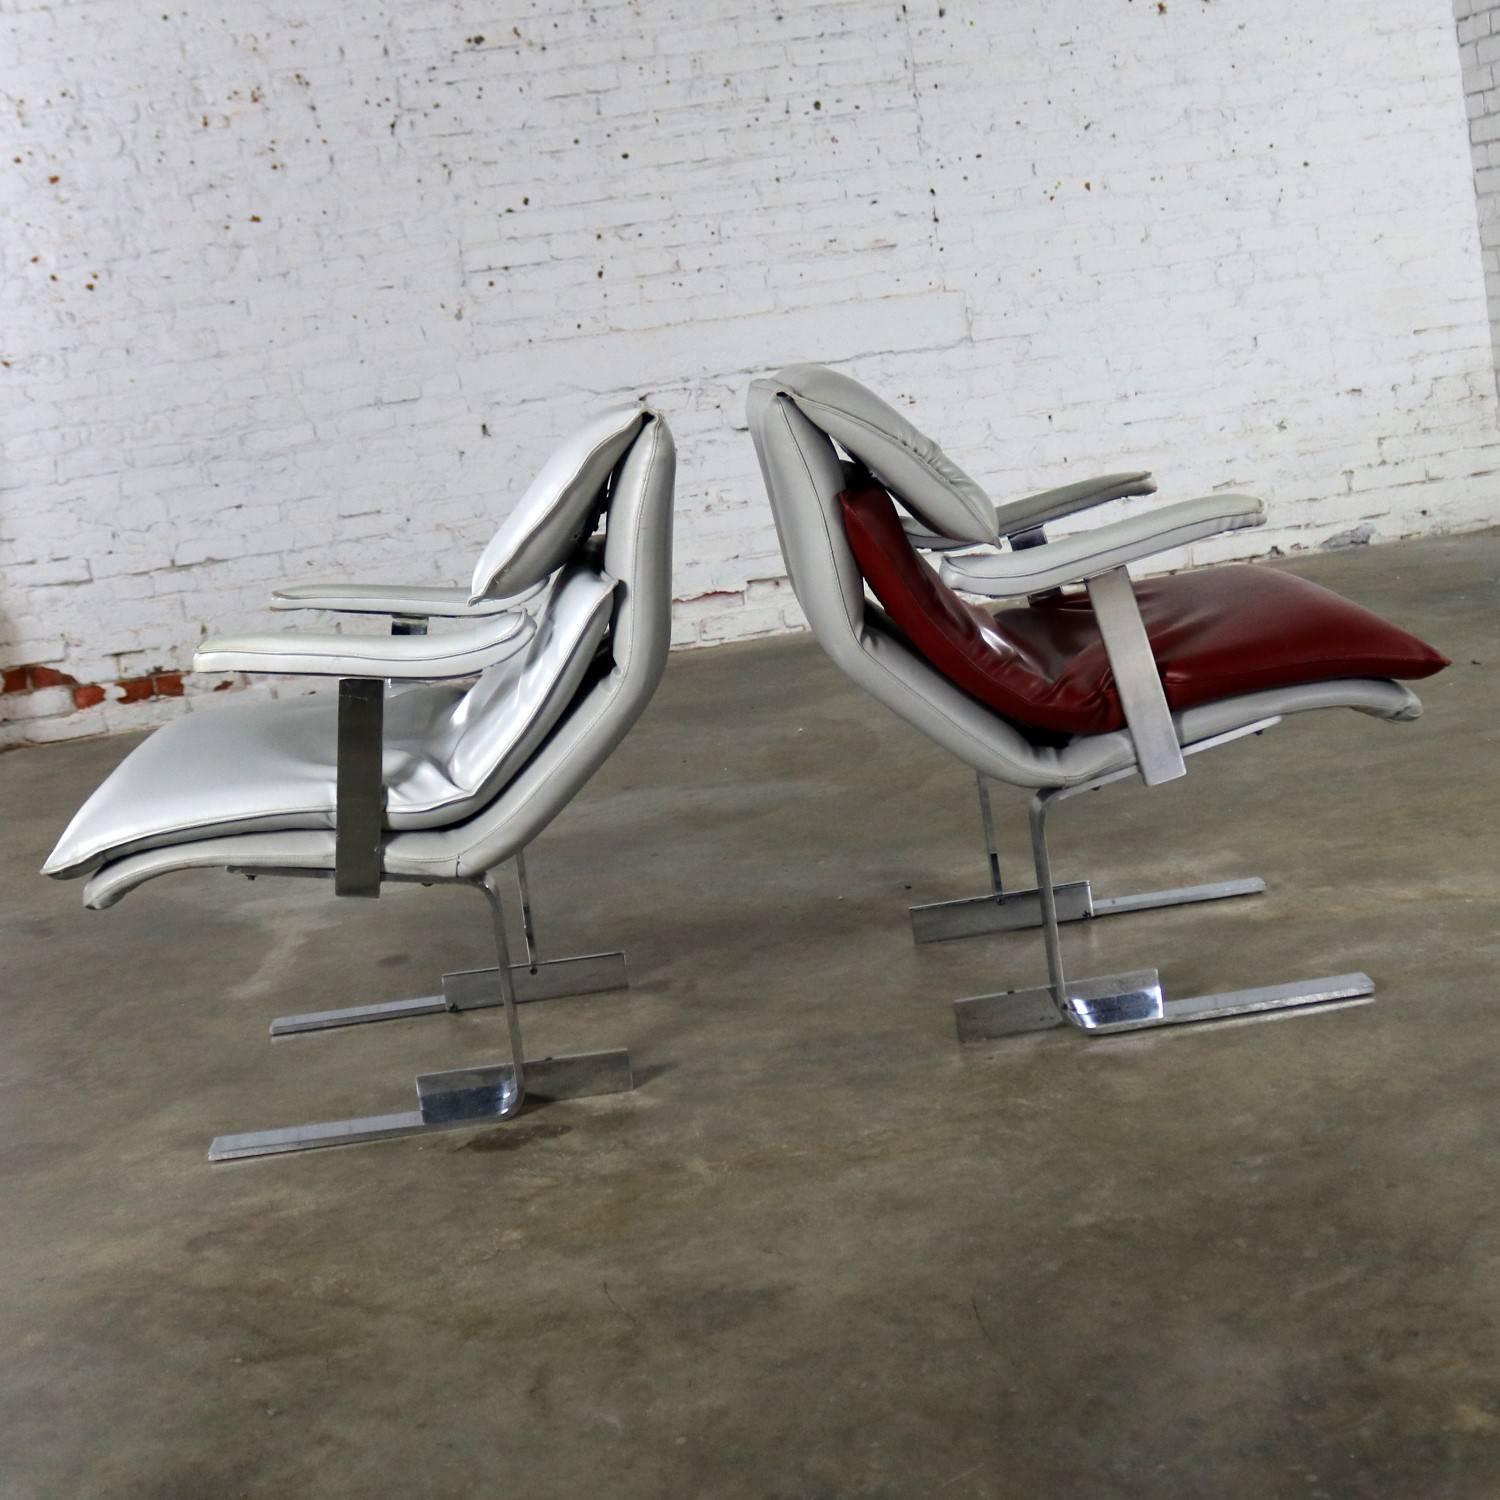 Vintage pair of handsome lounge chairs produced by G. Maletti. These chairs are made in the style of the Onda chair by Giovanni Offredi for Saporiti Italia. They are in wonderful vintage condition. The chrome has minor scratching as you would expect